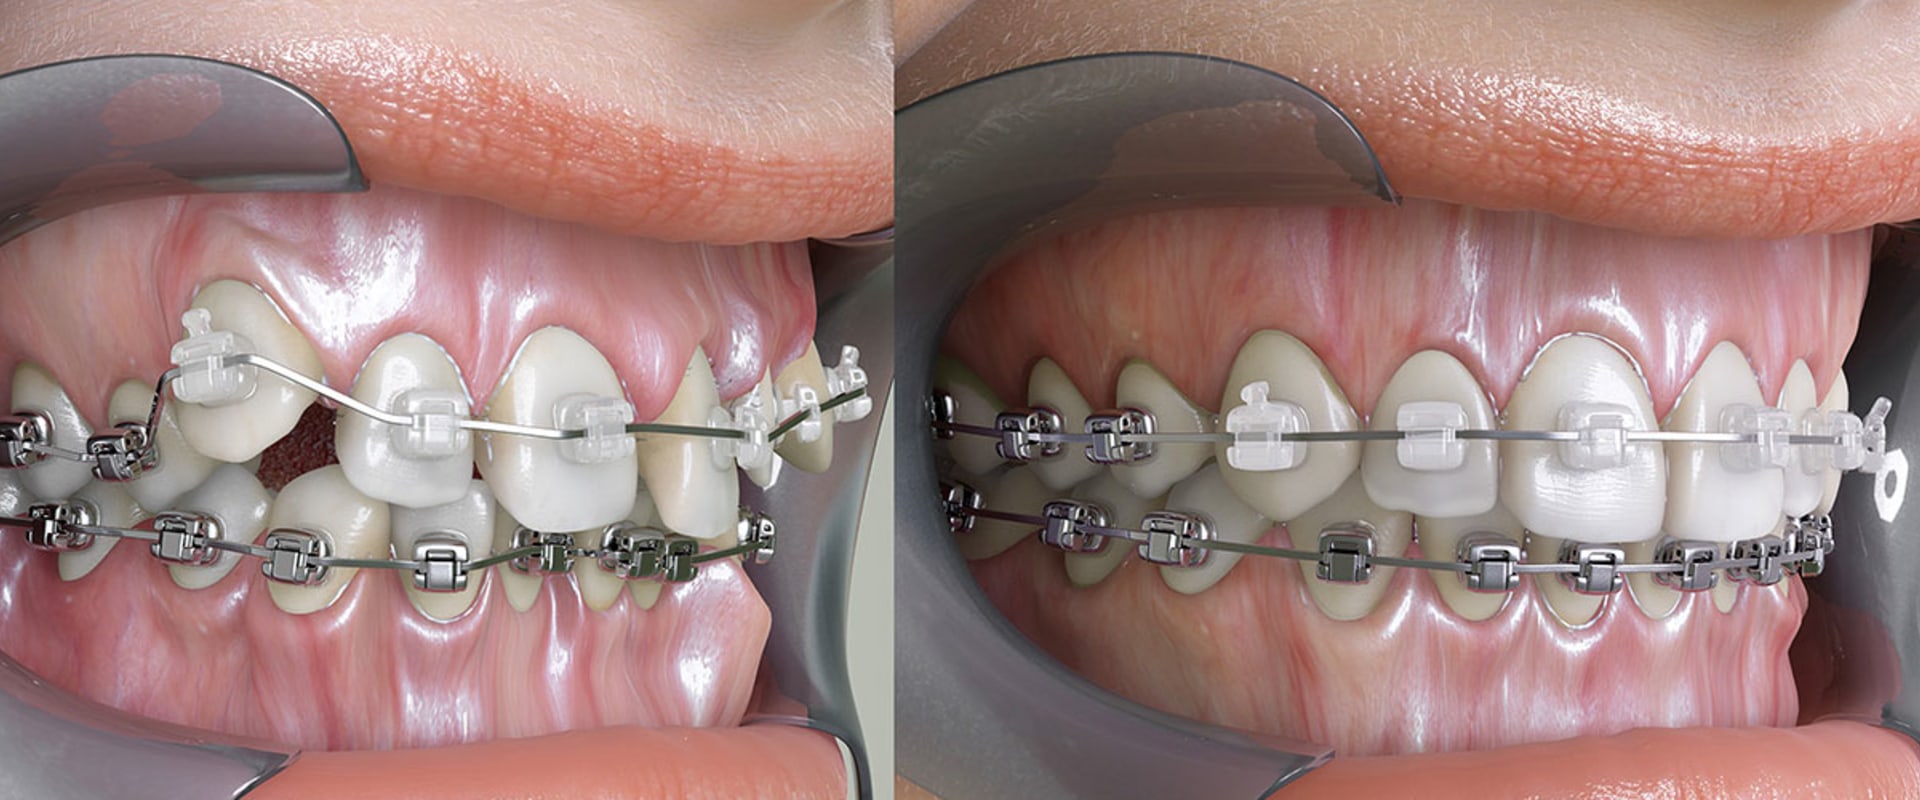 Can Orthodontists Help with Jaw Problems?